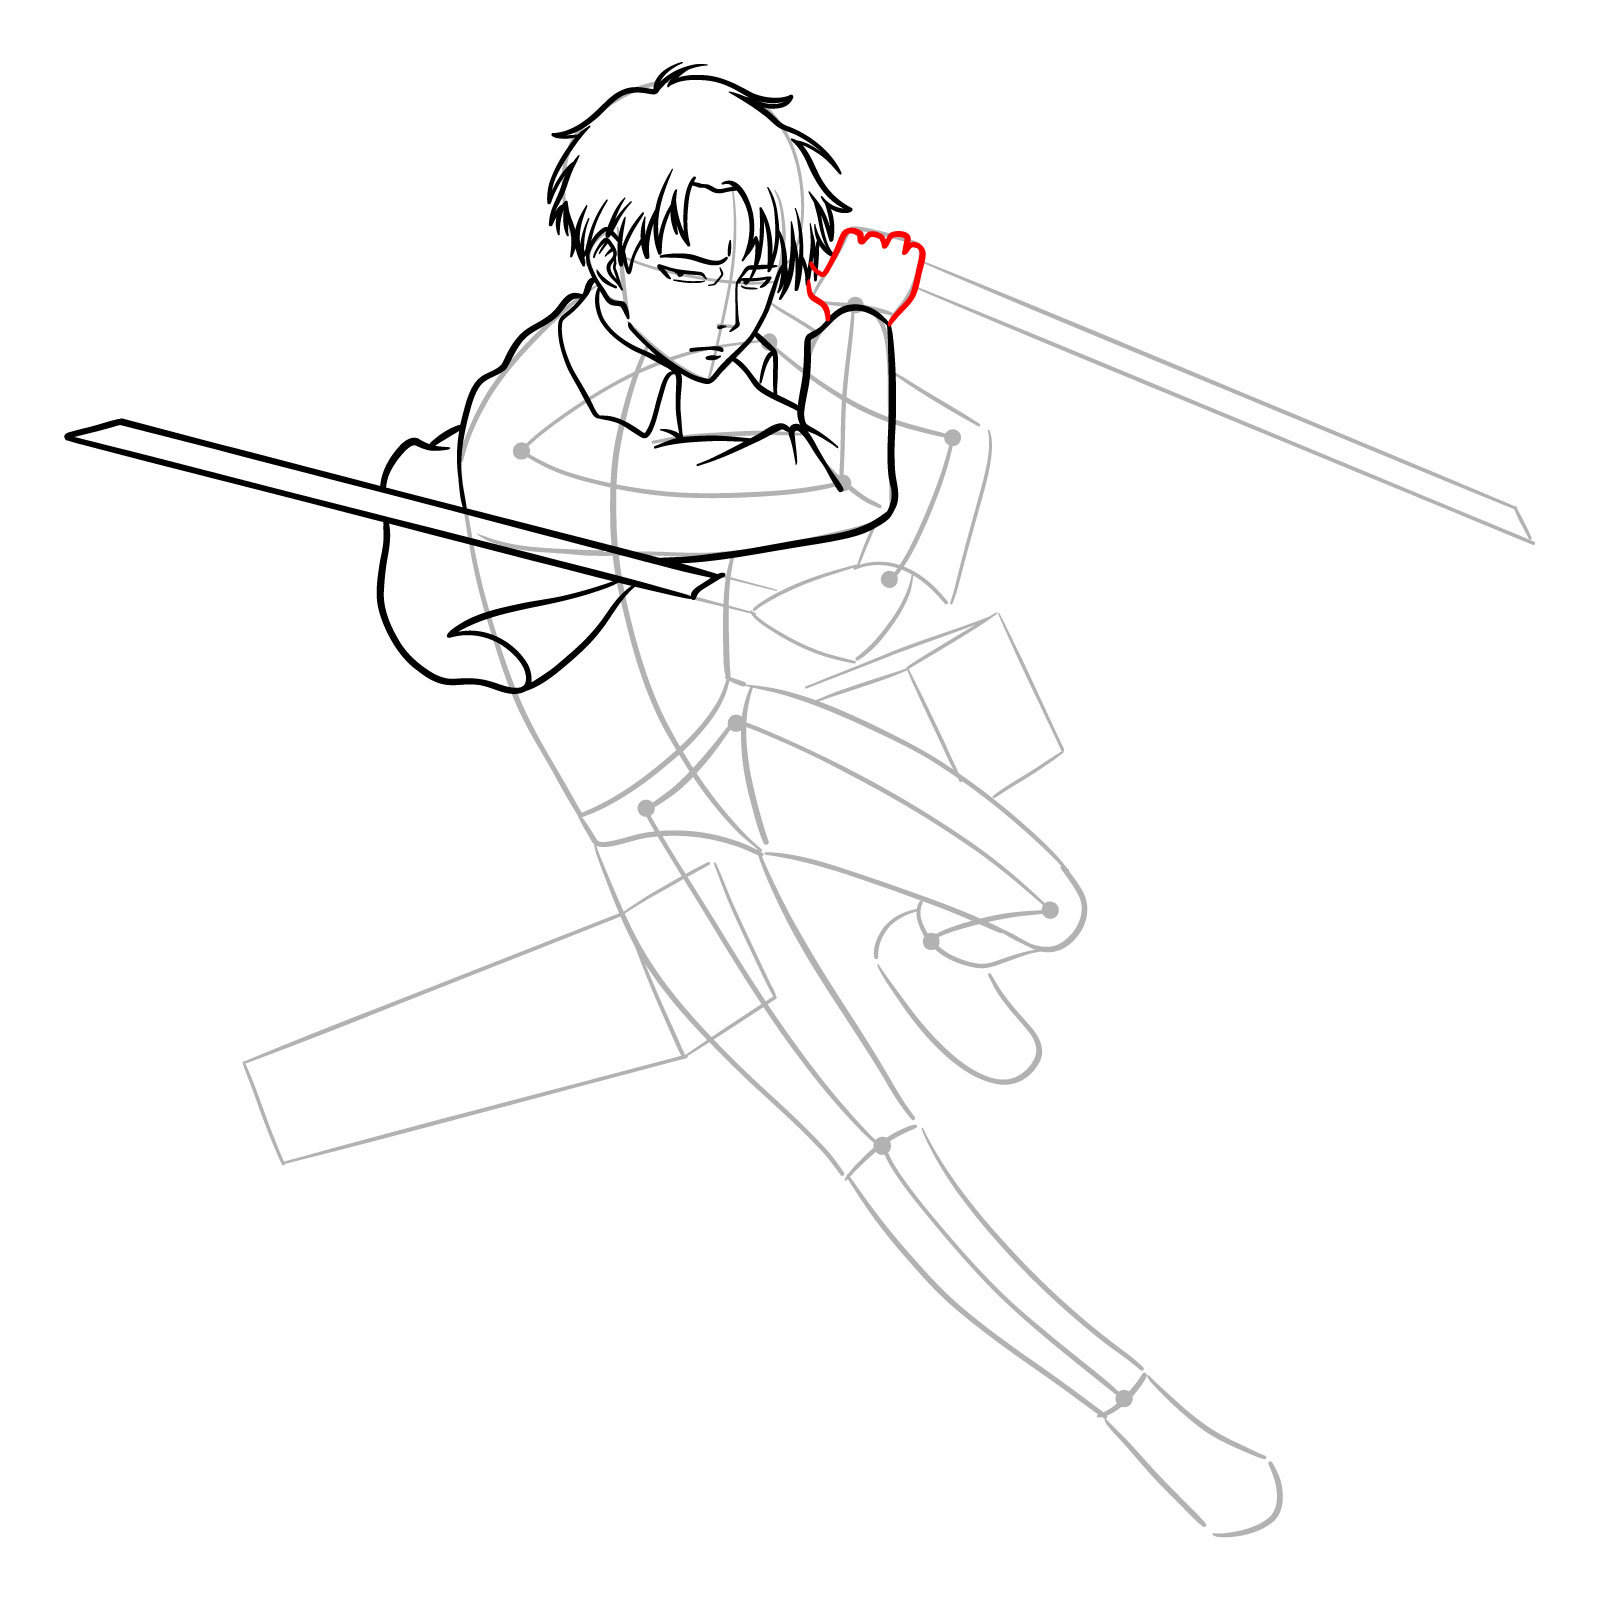 Illustration of Captain Levi's right hand gripping the sword in an action pose - step 12